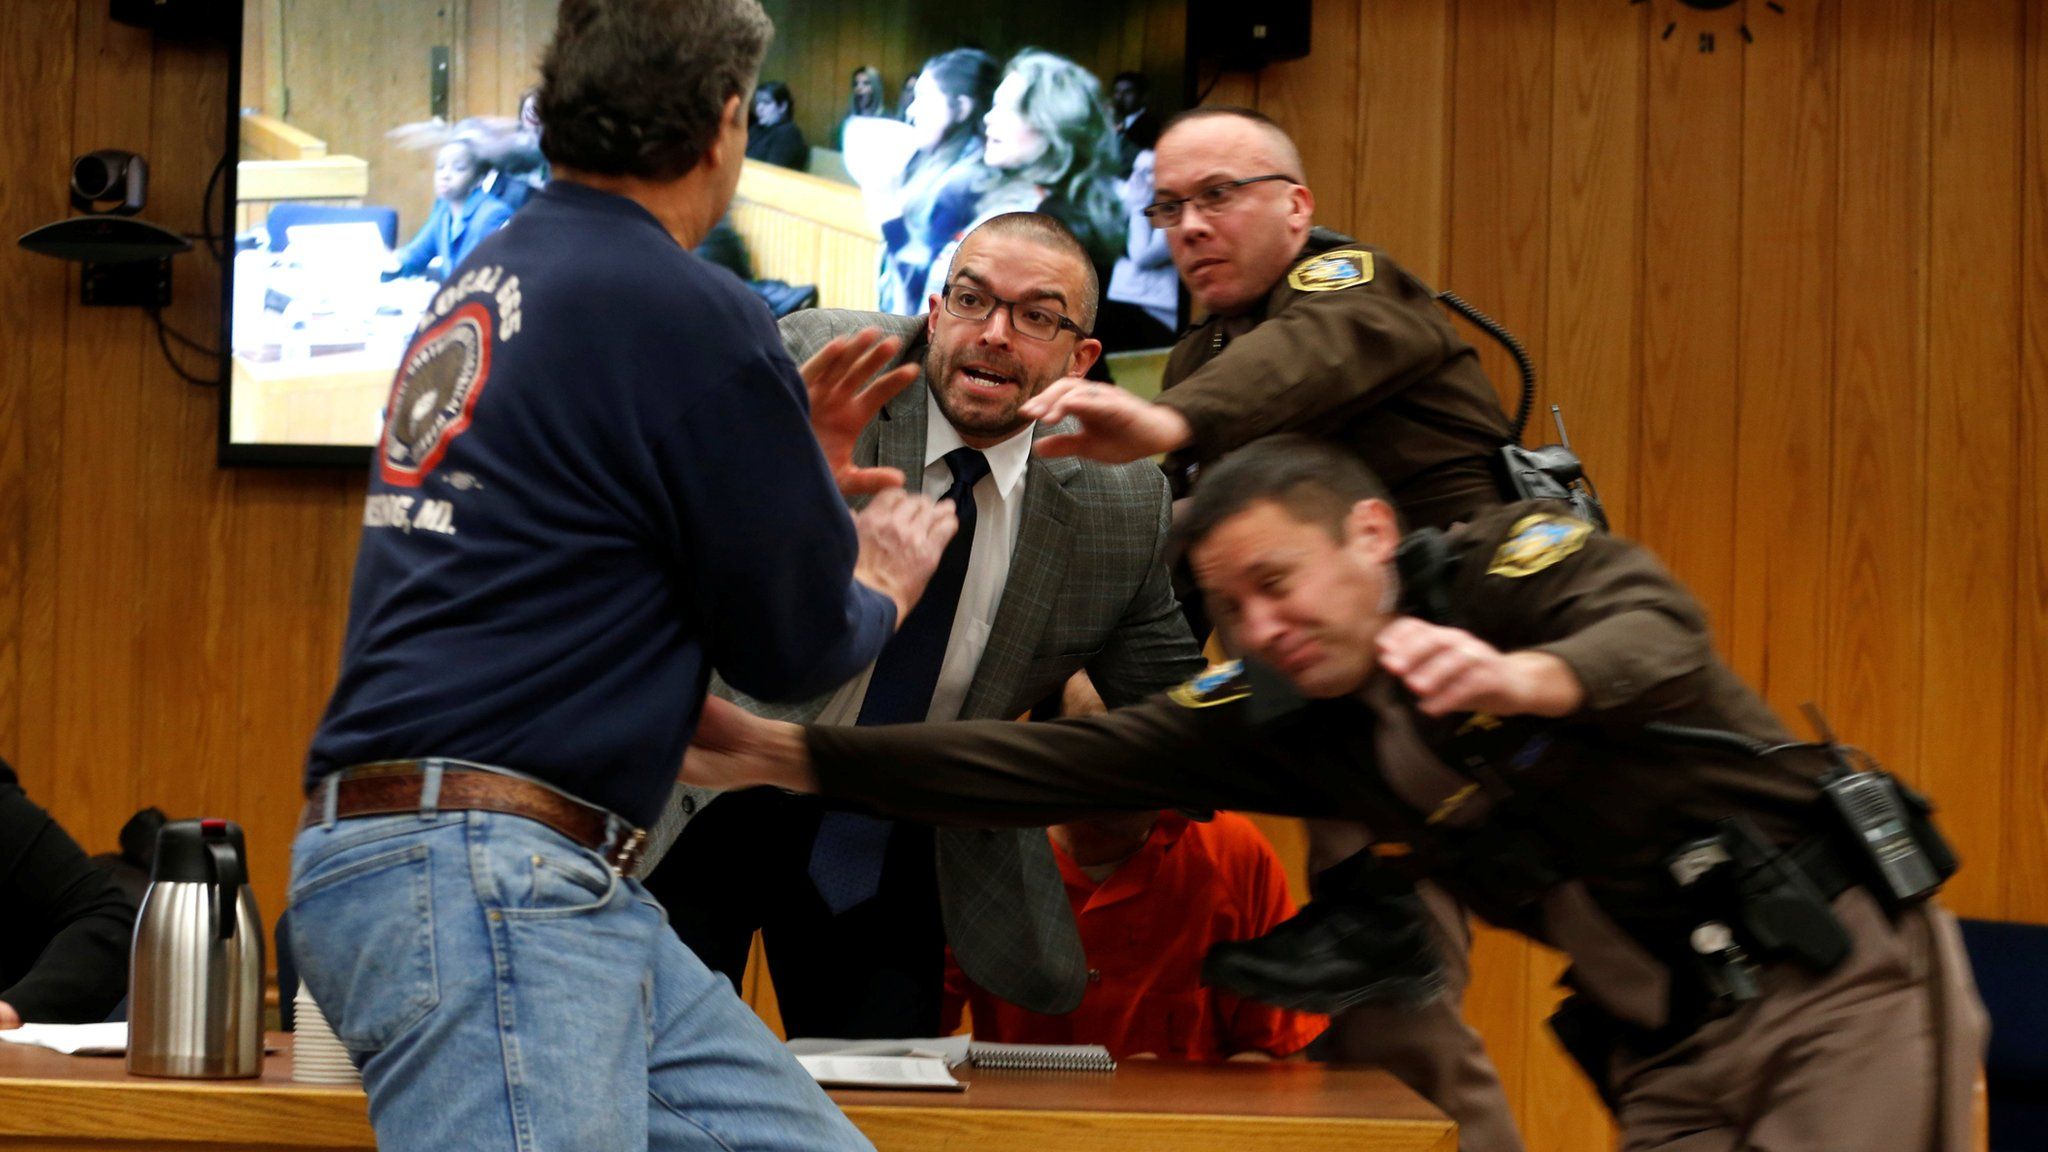 Randall Margraves (L) lunges at Larry Nassar (wearing orange) a former team USA Gymnastics doctor who pleaded guilty to sex abuse in November 2017